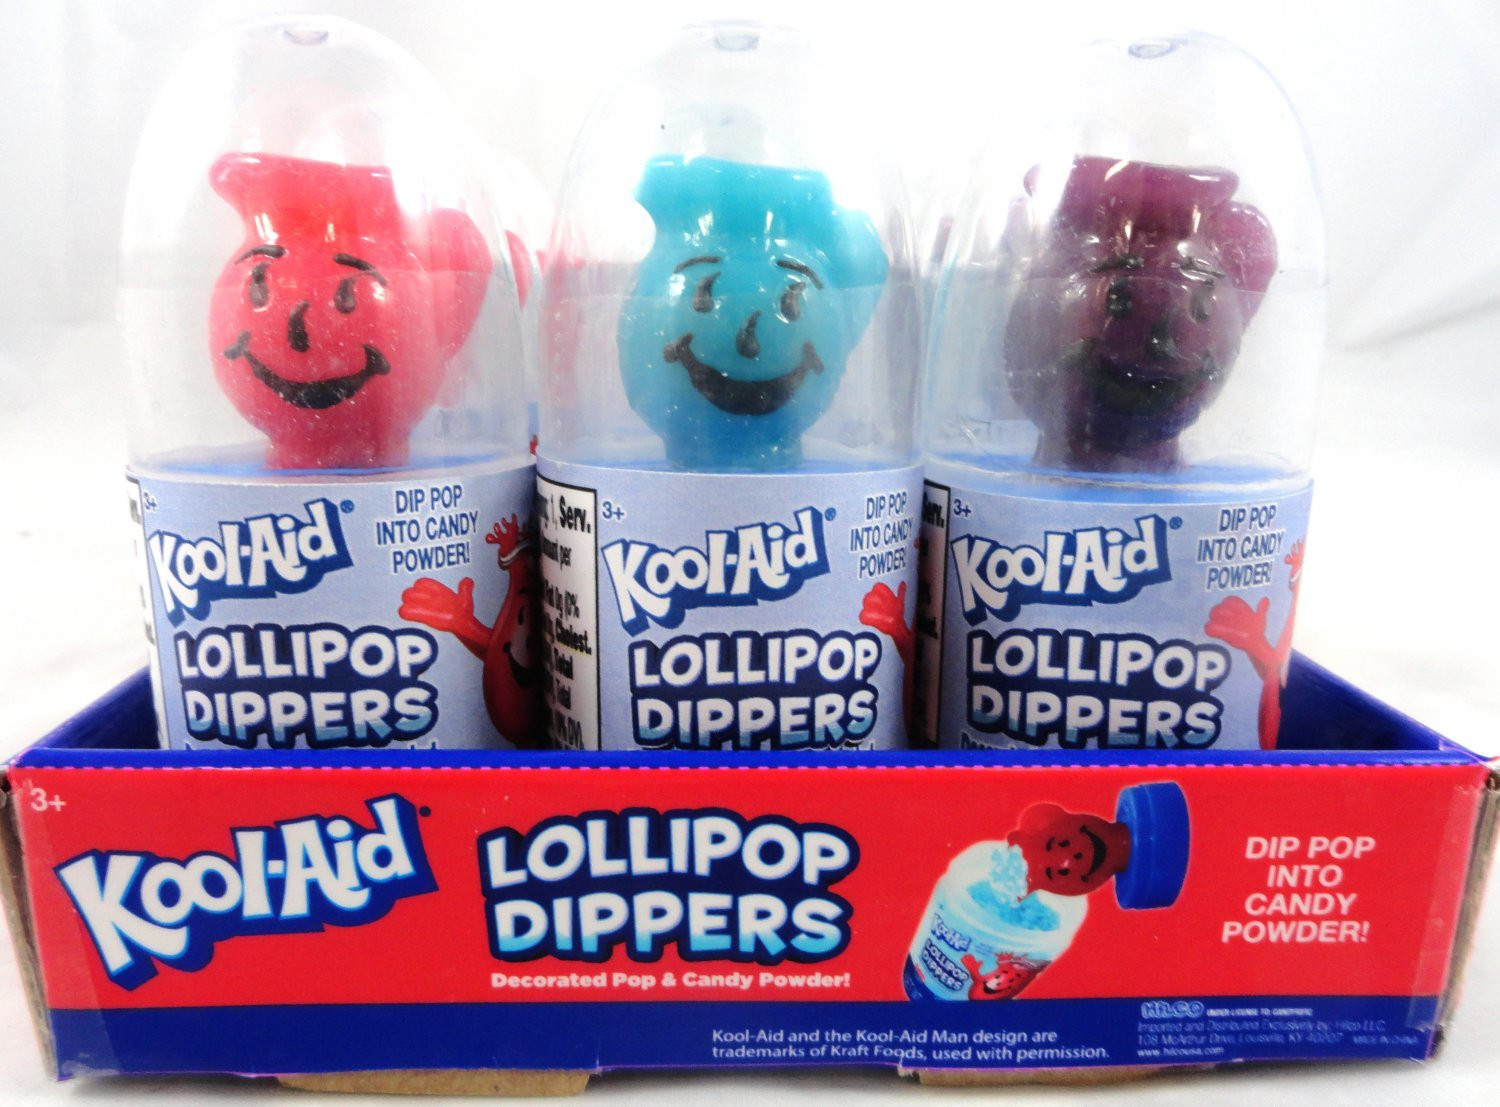 abby boyer recommends dippin in the kool aid pic